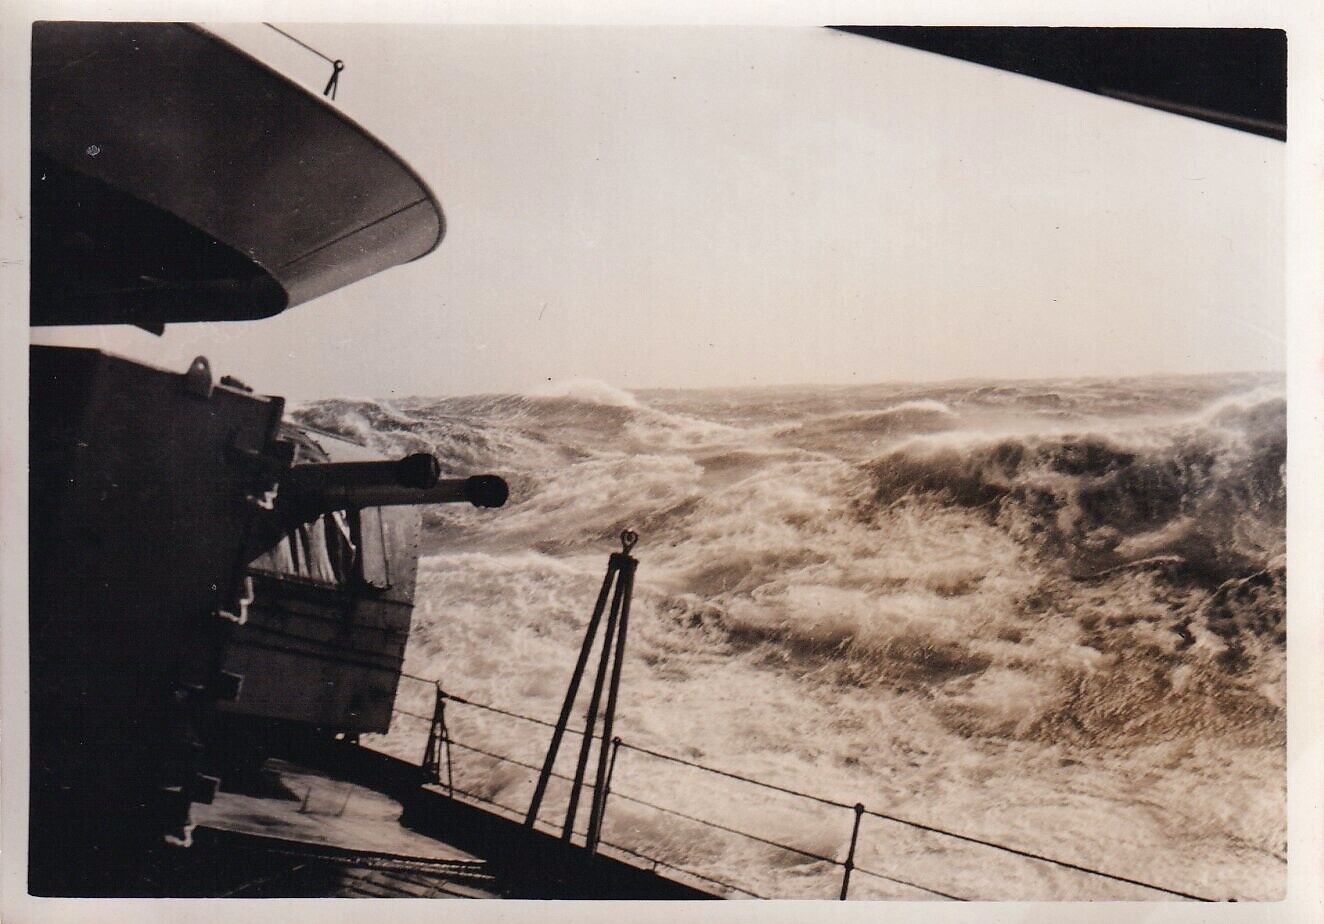 PHOTOGRAPH - HEAVY SEA FROM THE DECK OF THE LIGHT CRUISER HMS DESPATCH - 1935